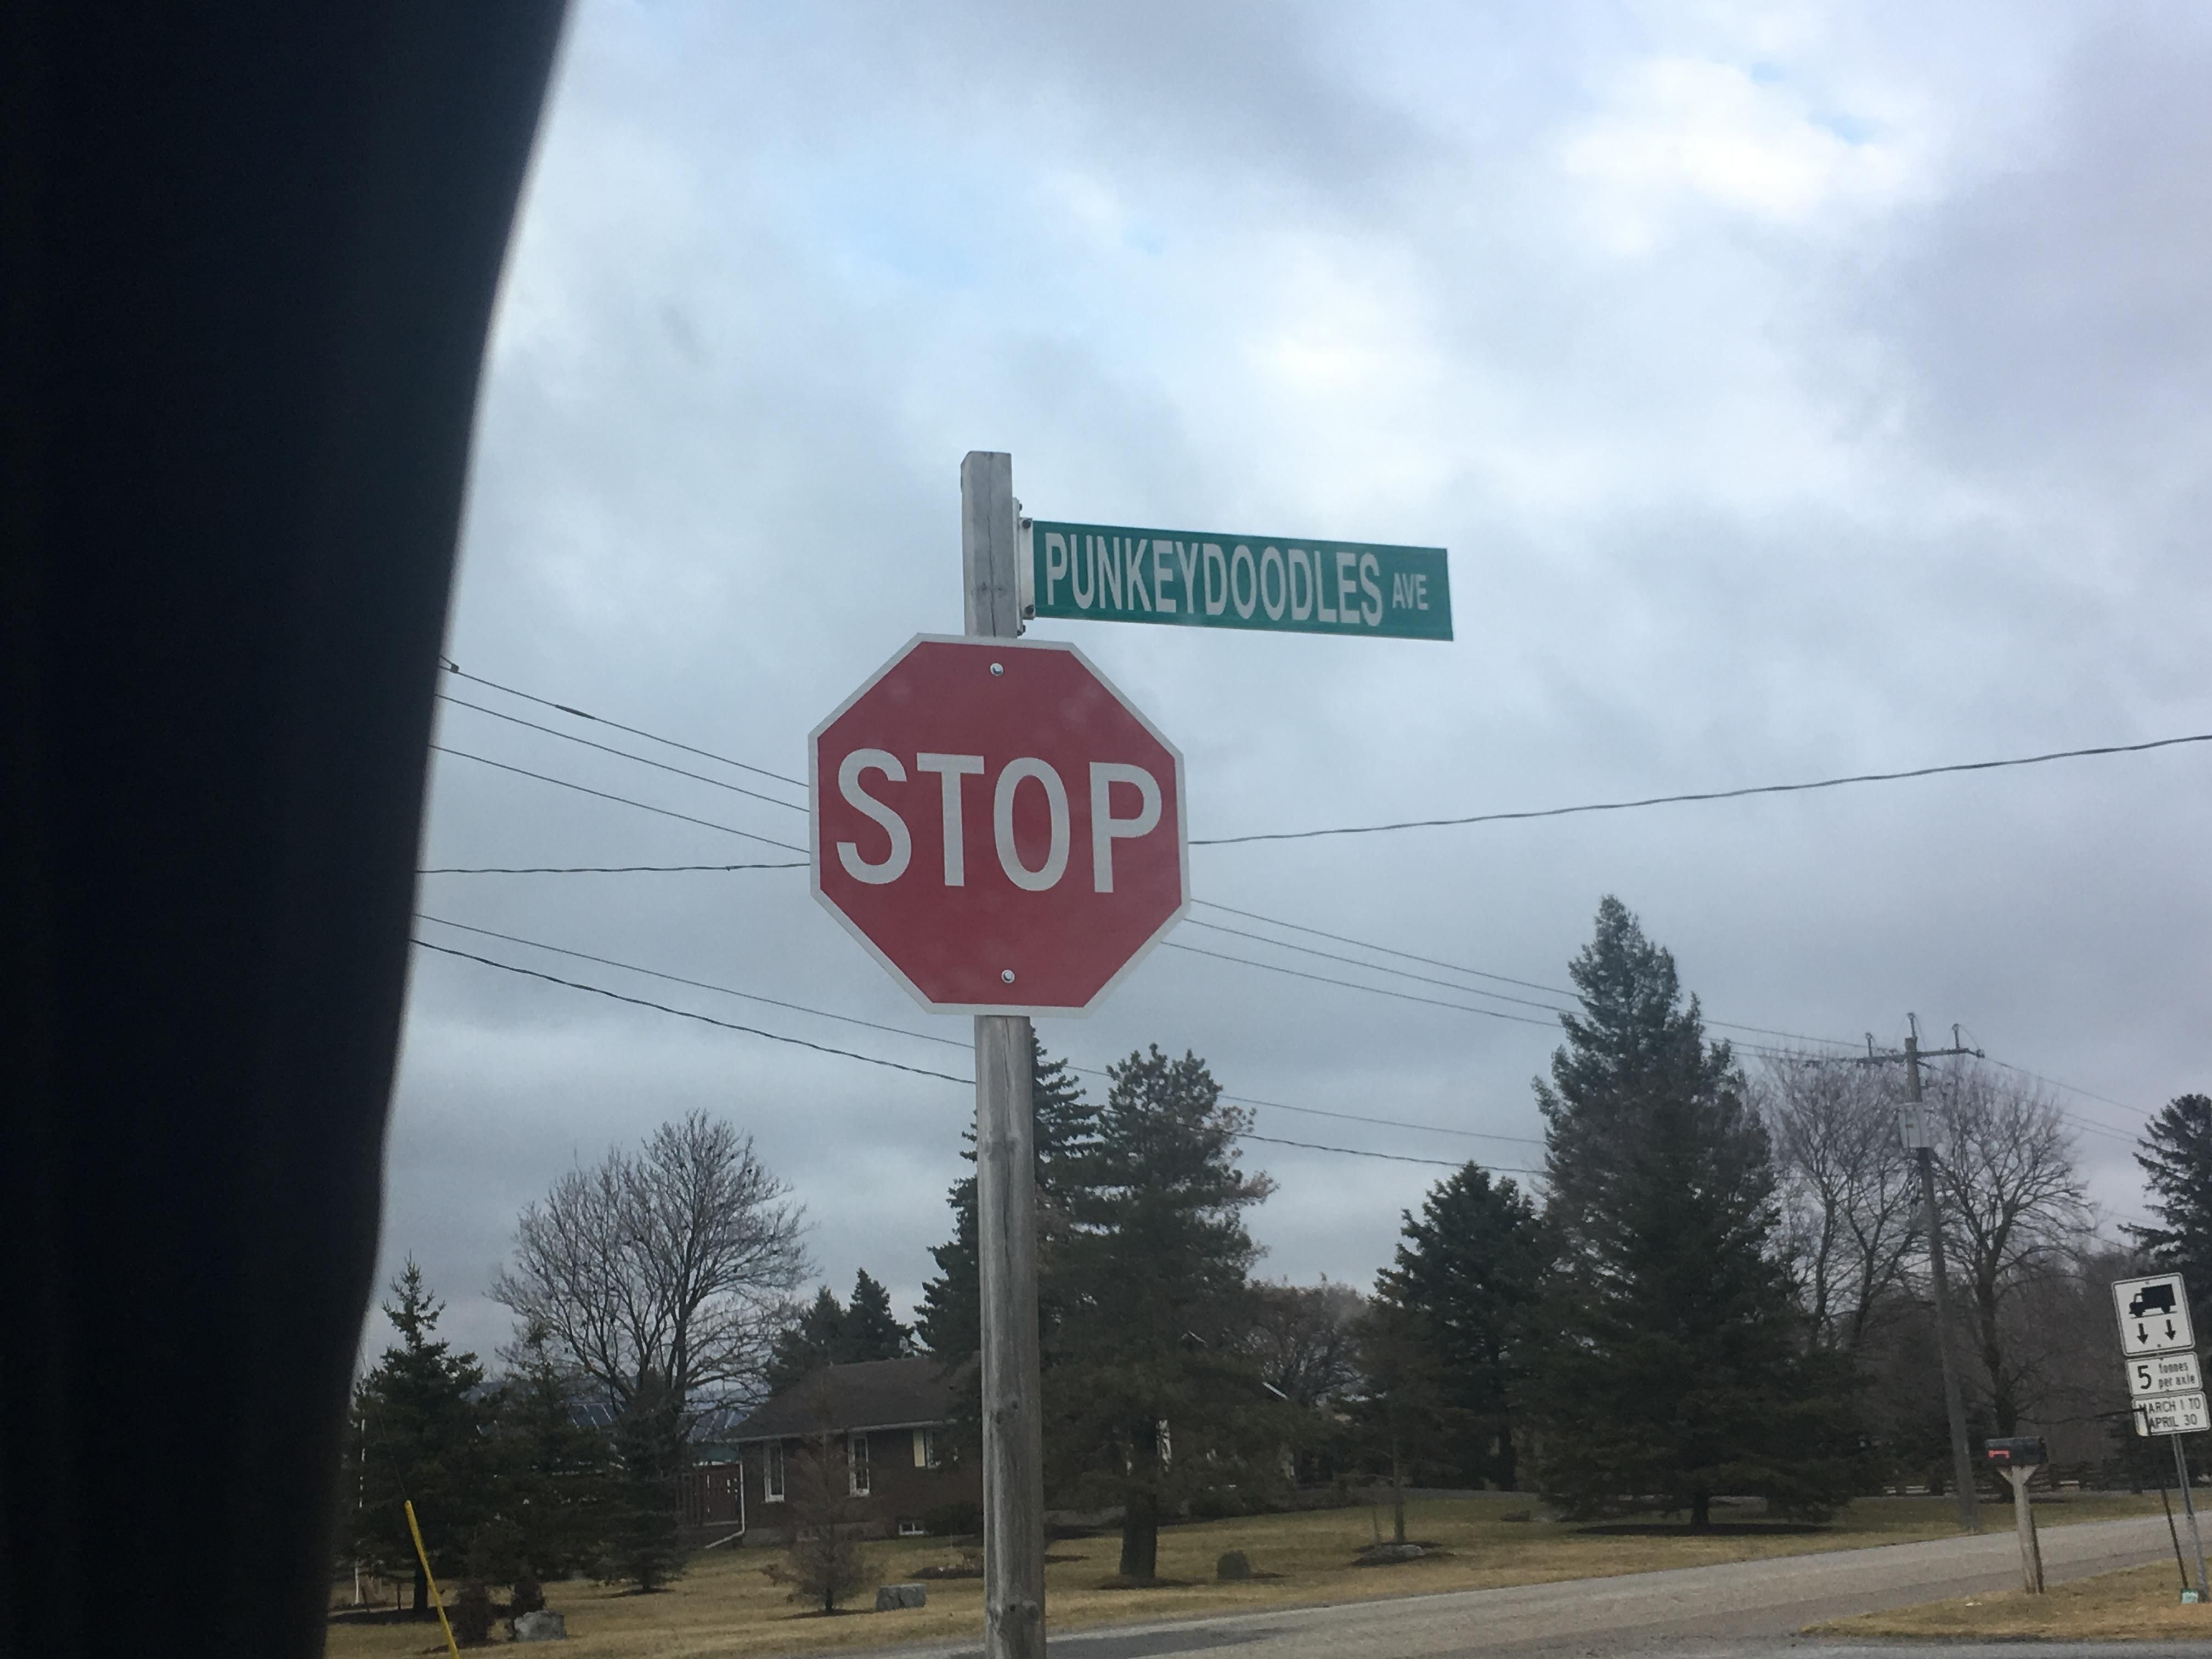 Found the most ridiculous street name yesterday.